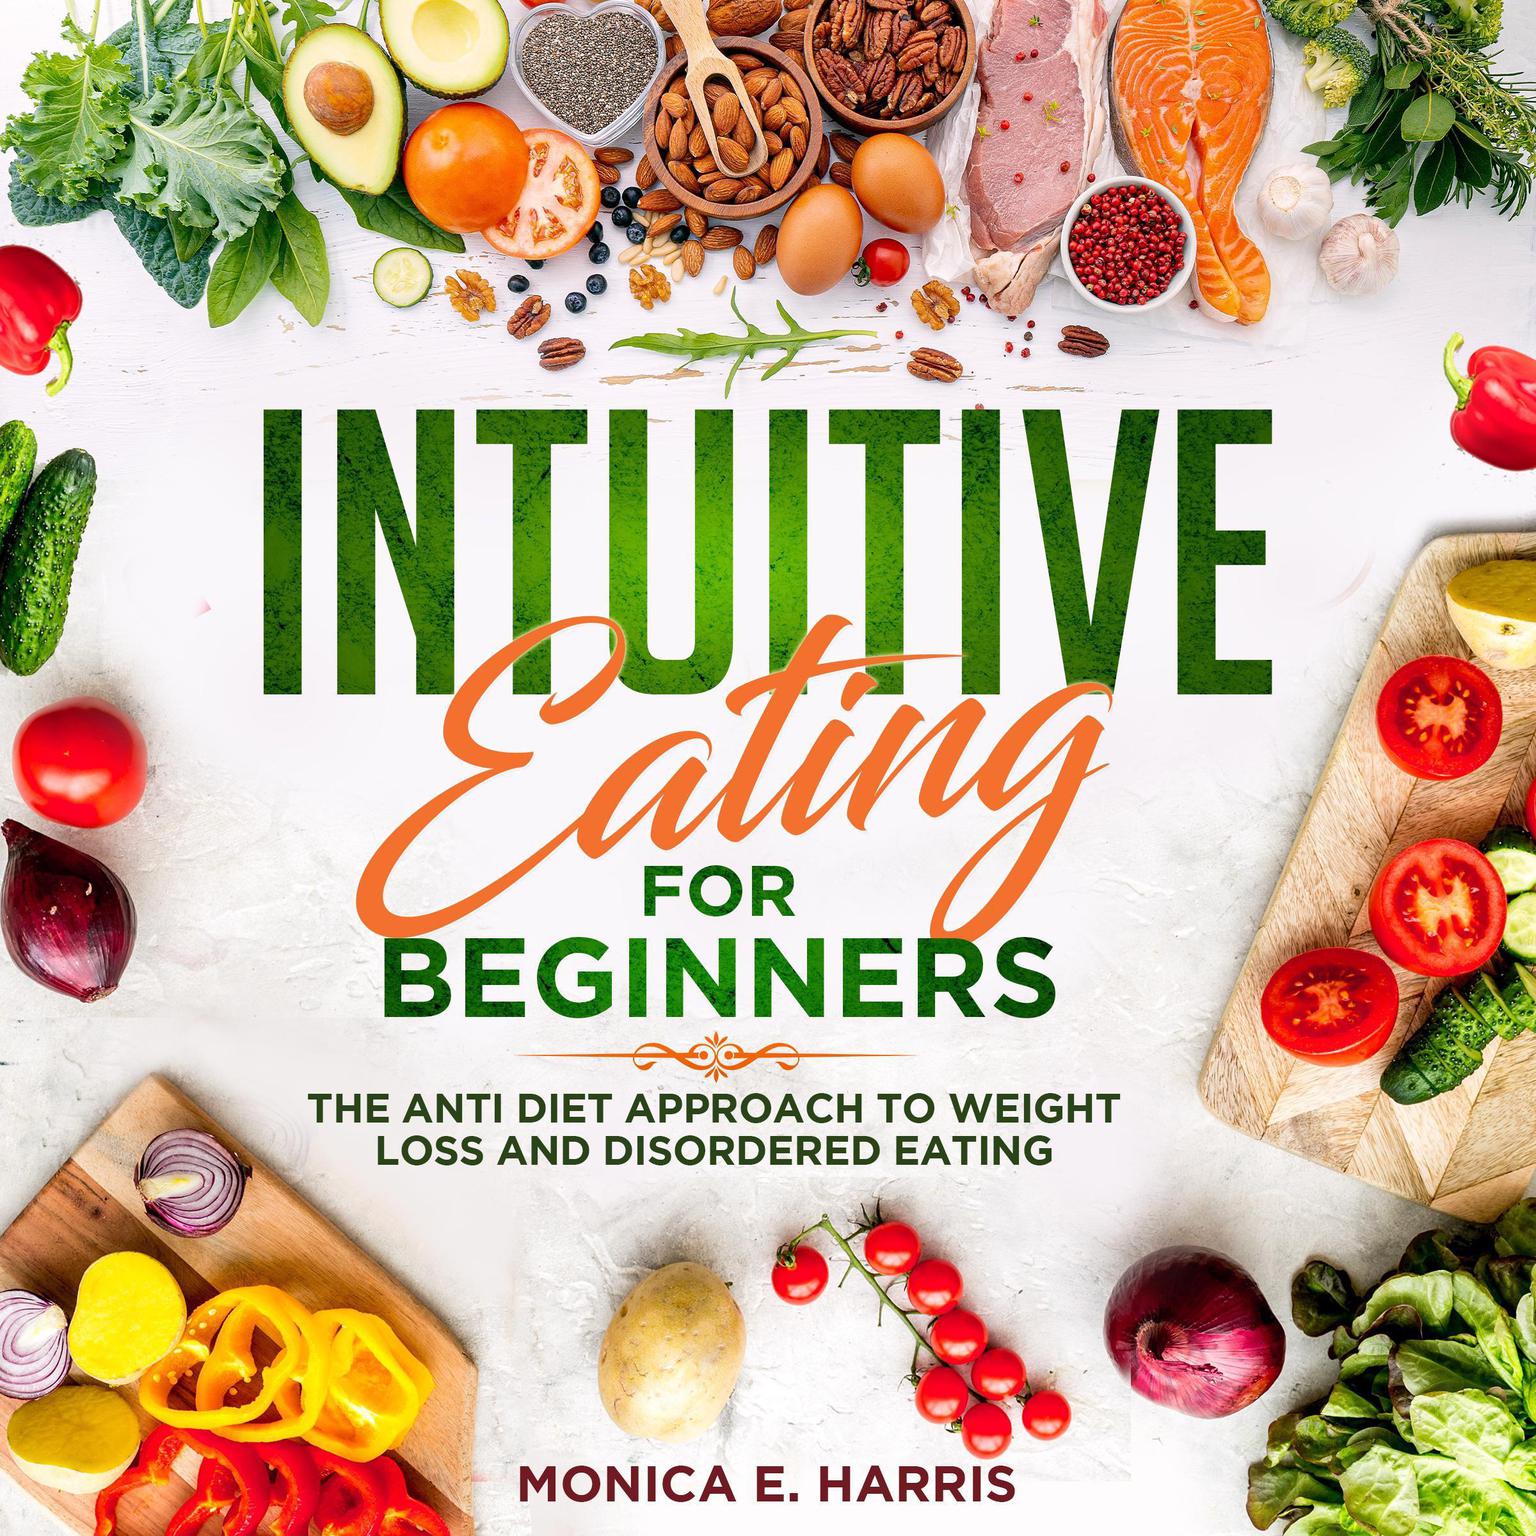 Intuitive Eating for Beginners: The Anti Diet Approach to Weight Loss and Disordered Eating Audiobook, by Monica E. Harris